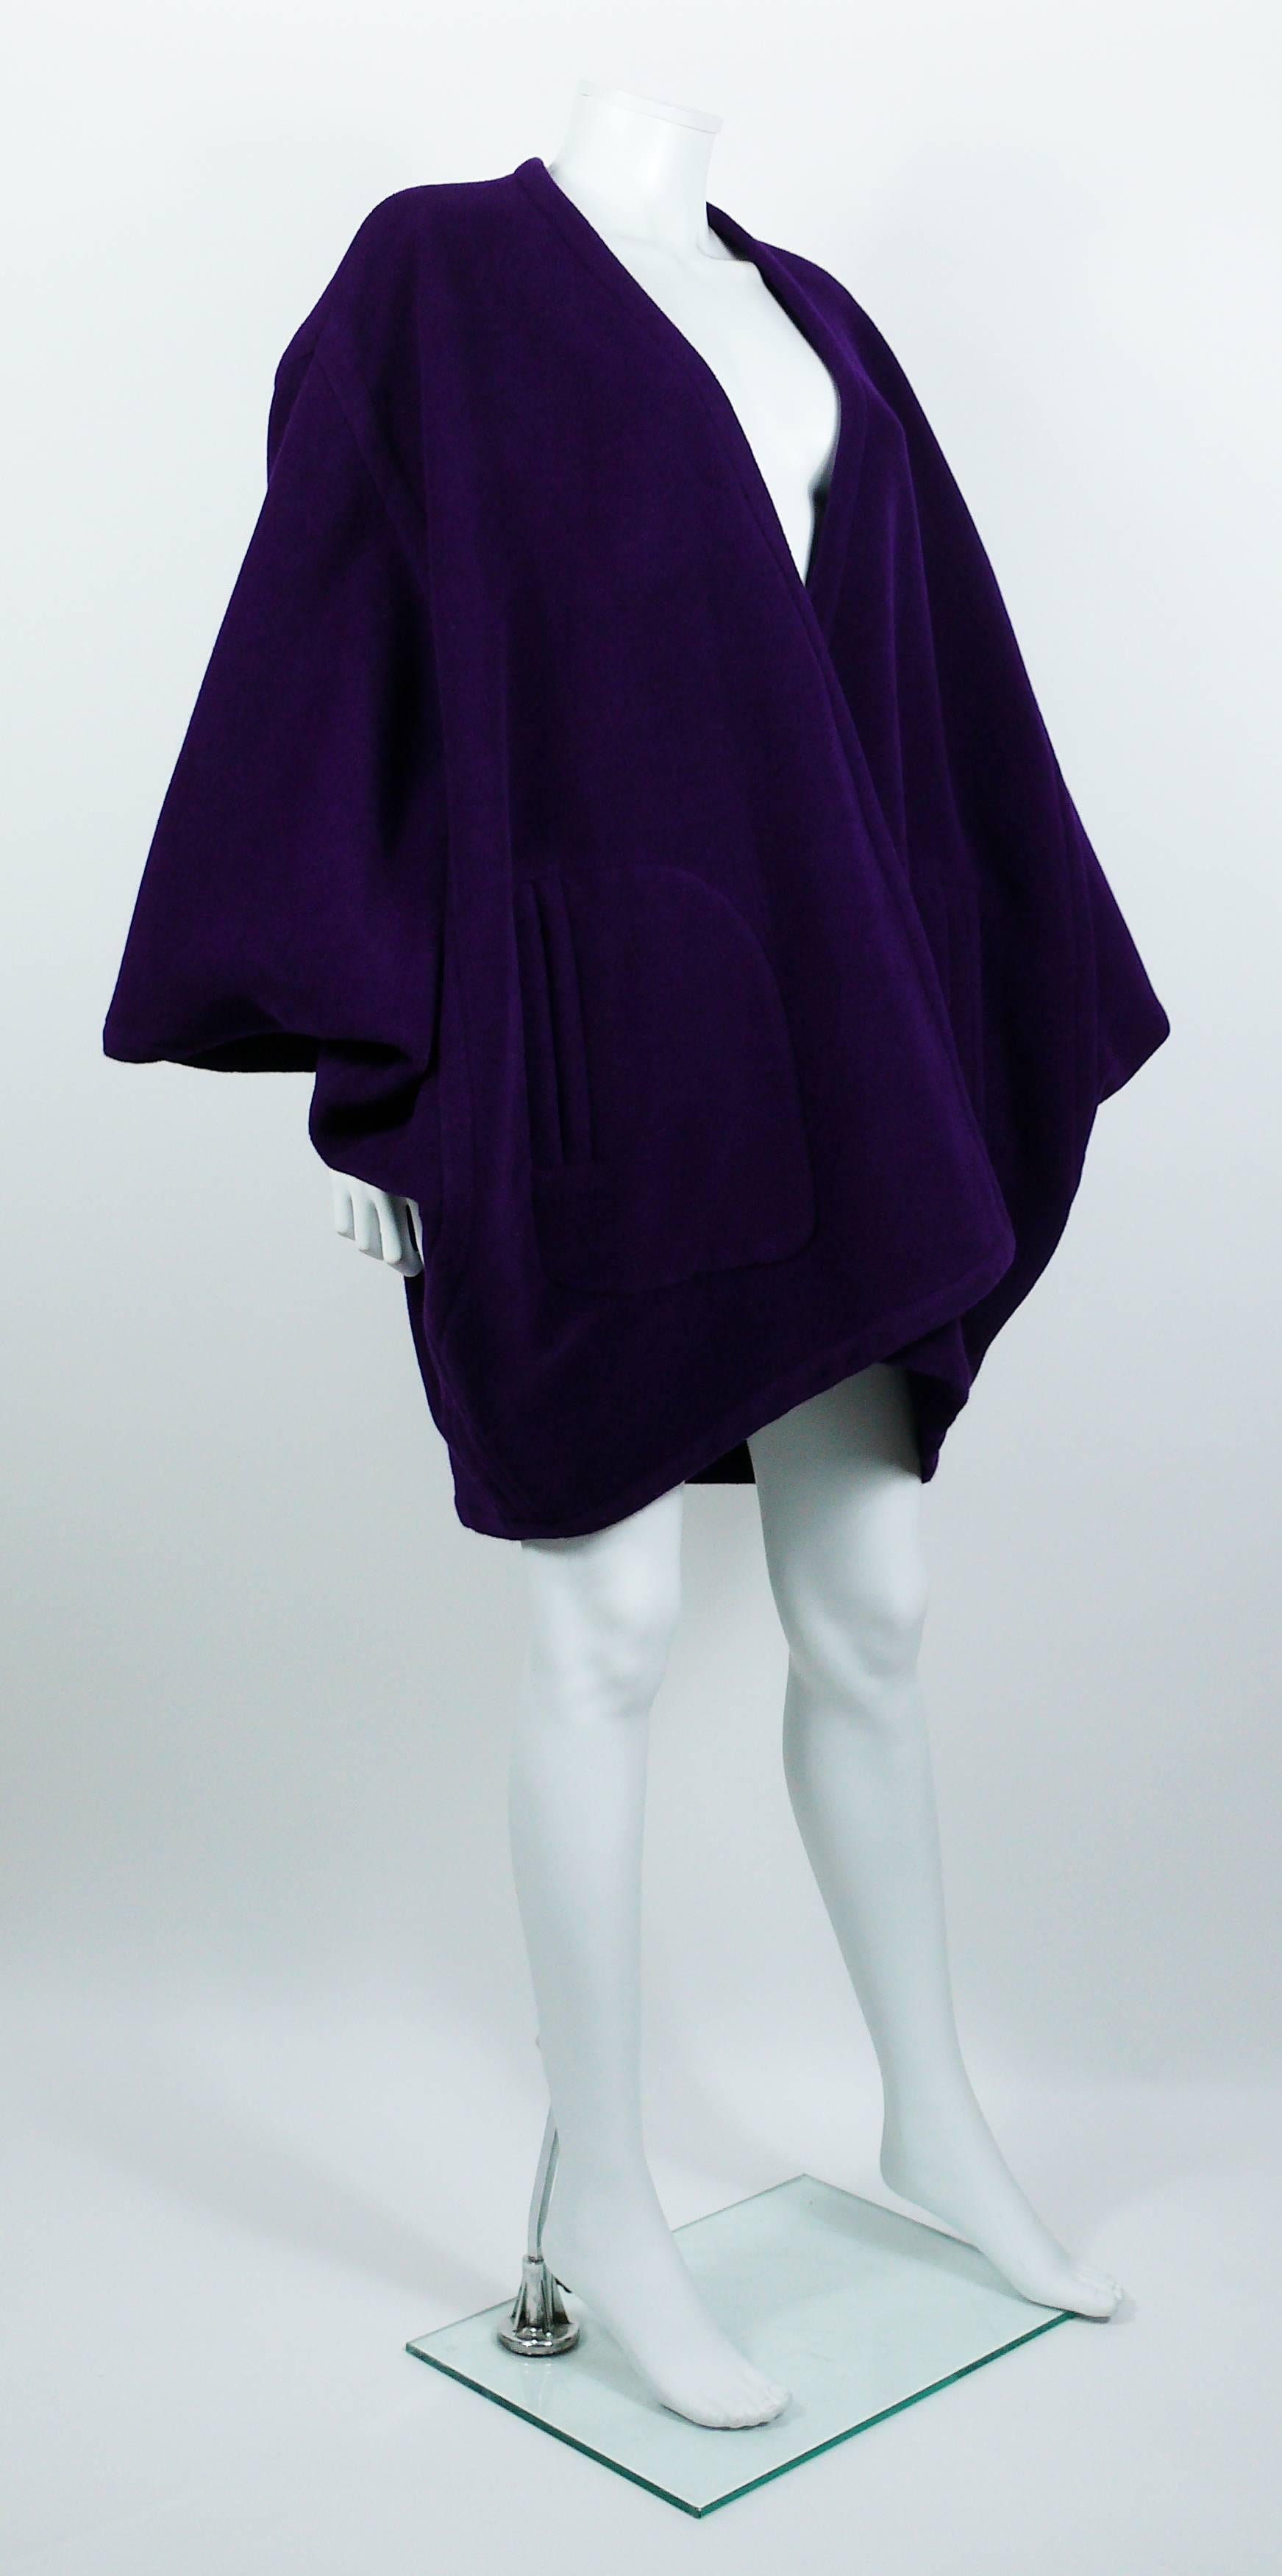 YVES SAINT LAURENT Rive Gauche vintage purple cape.

*** IMPORTANT ***
We were unable to photograph the true color under photo studio lighting. True color is closer to the one shown on photo 6. 

This cape features :
- Smooth and luxurious fabric